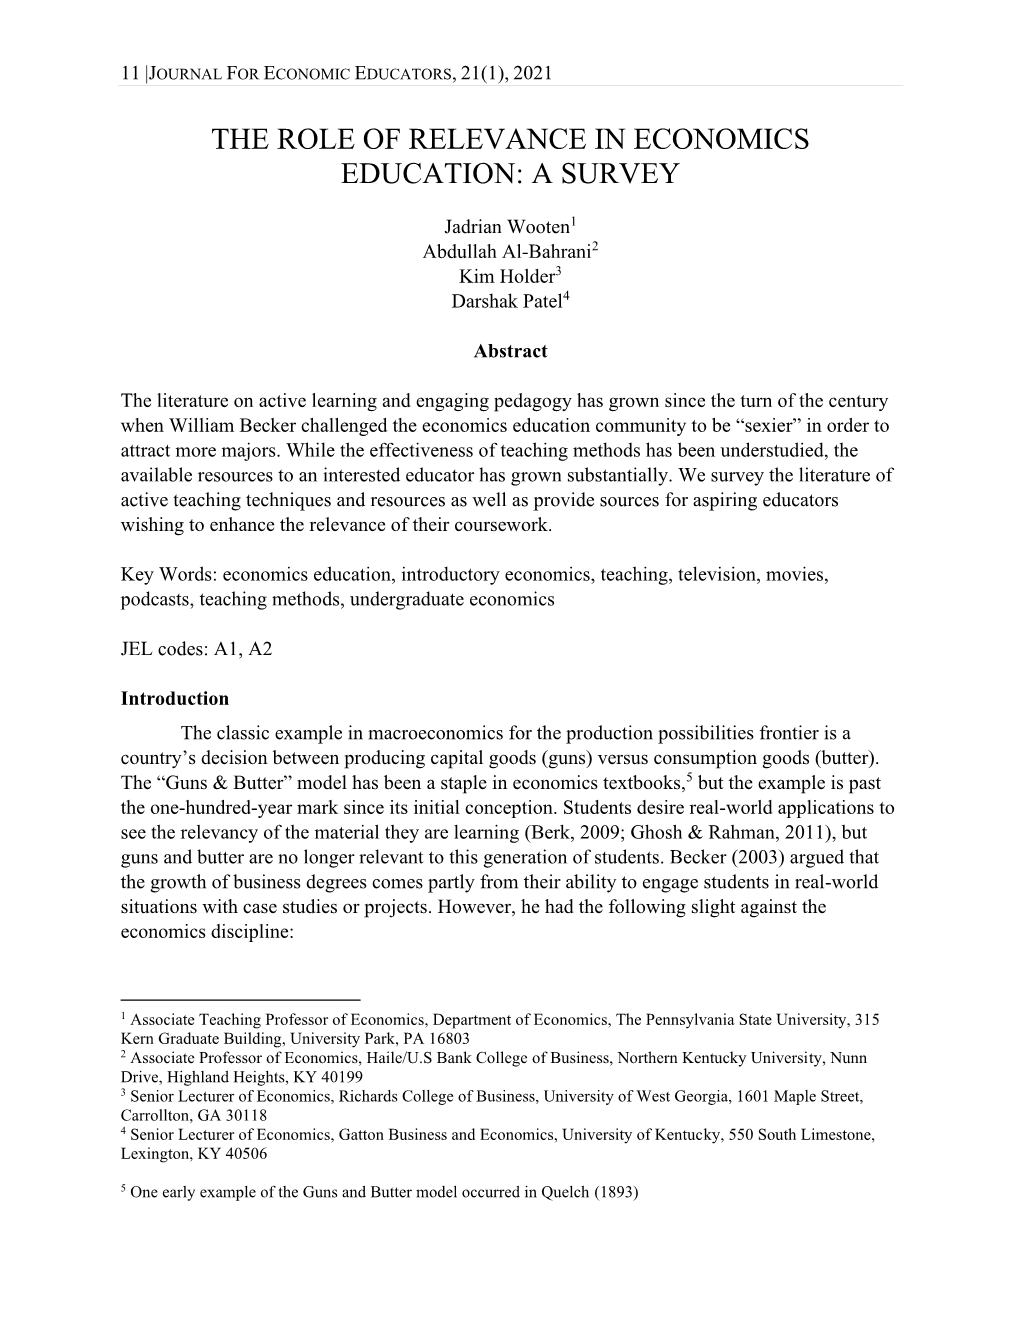 The Role of Relevance in Economics Education: a Survey